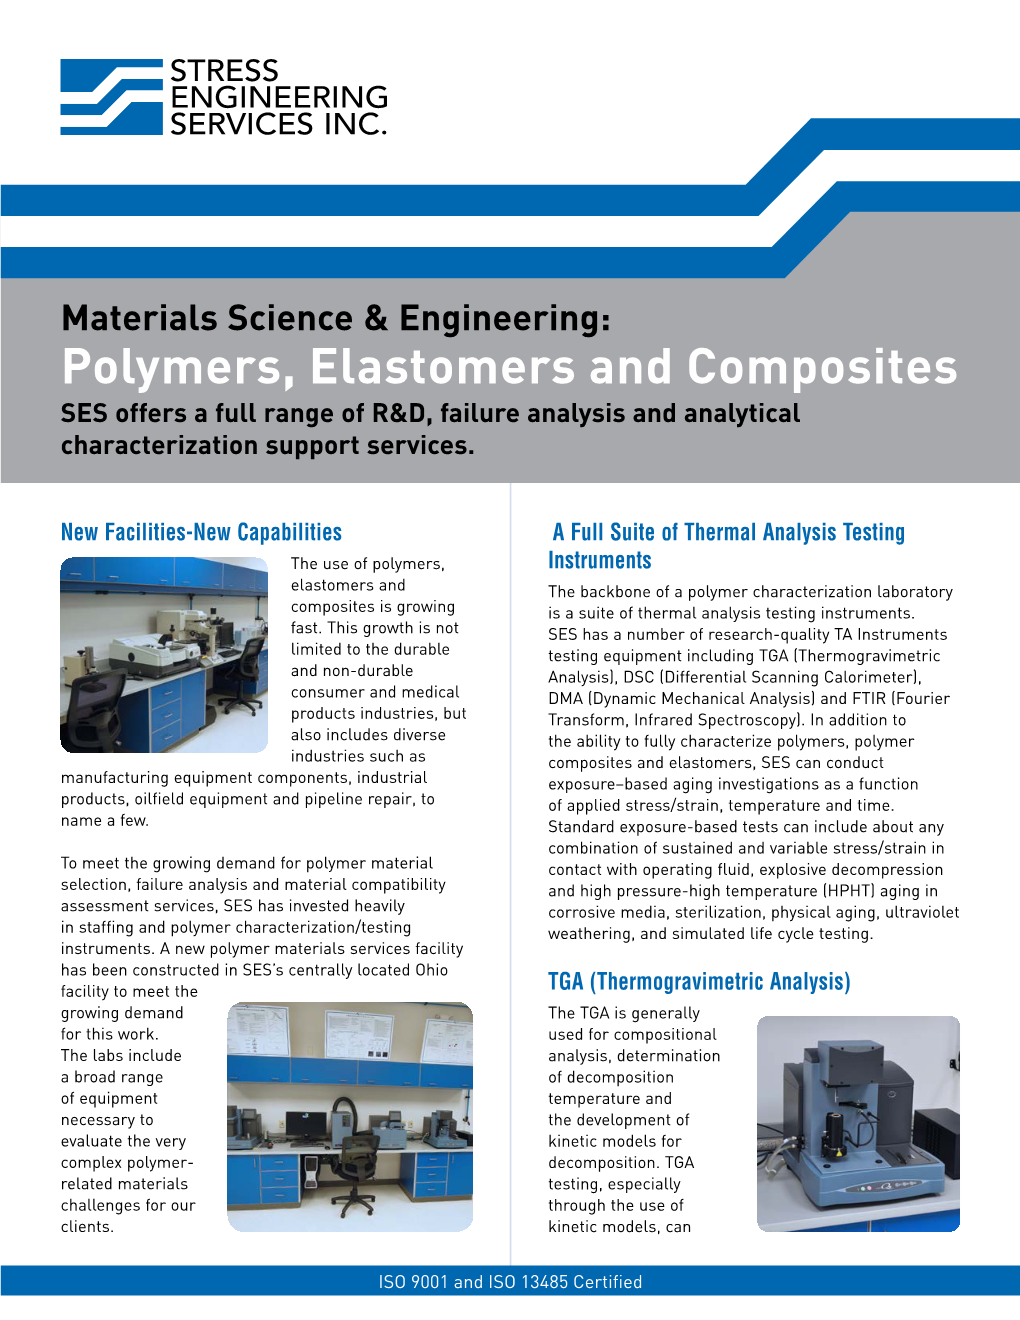 Polymers, Elastomers and Composites SES Offers a Full Range of R&D, Failure Analysis and Analytical Characterization Support Services